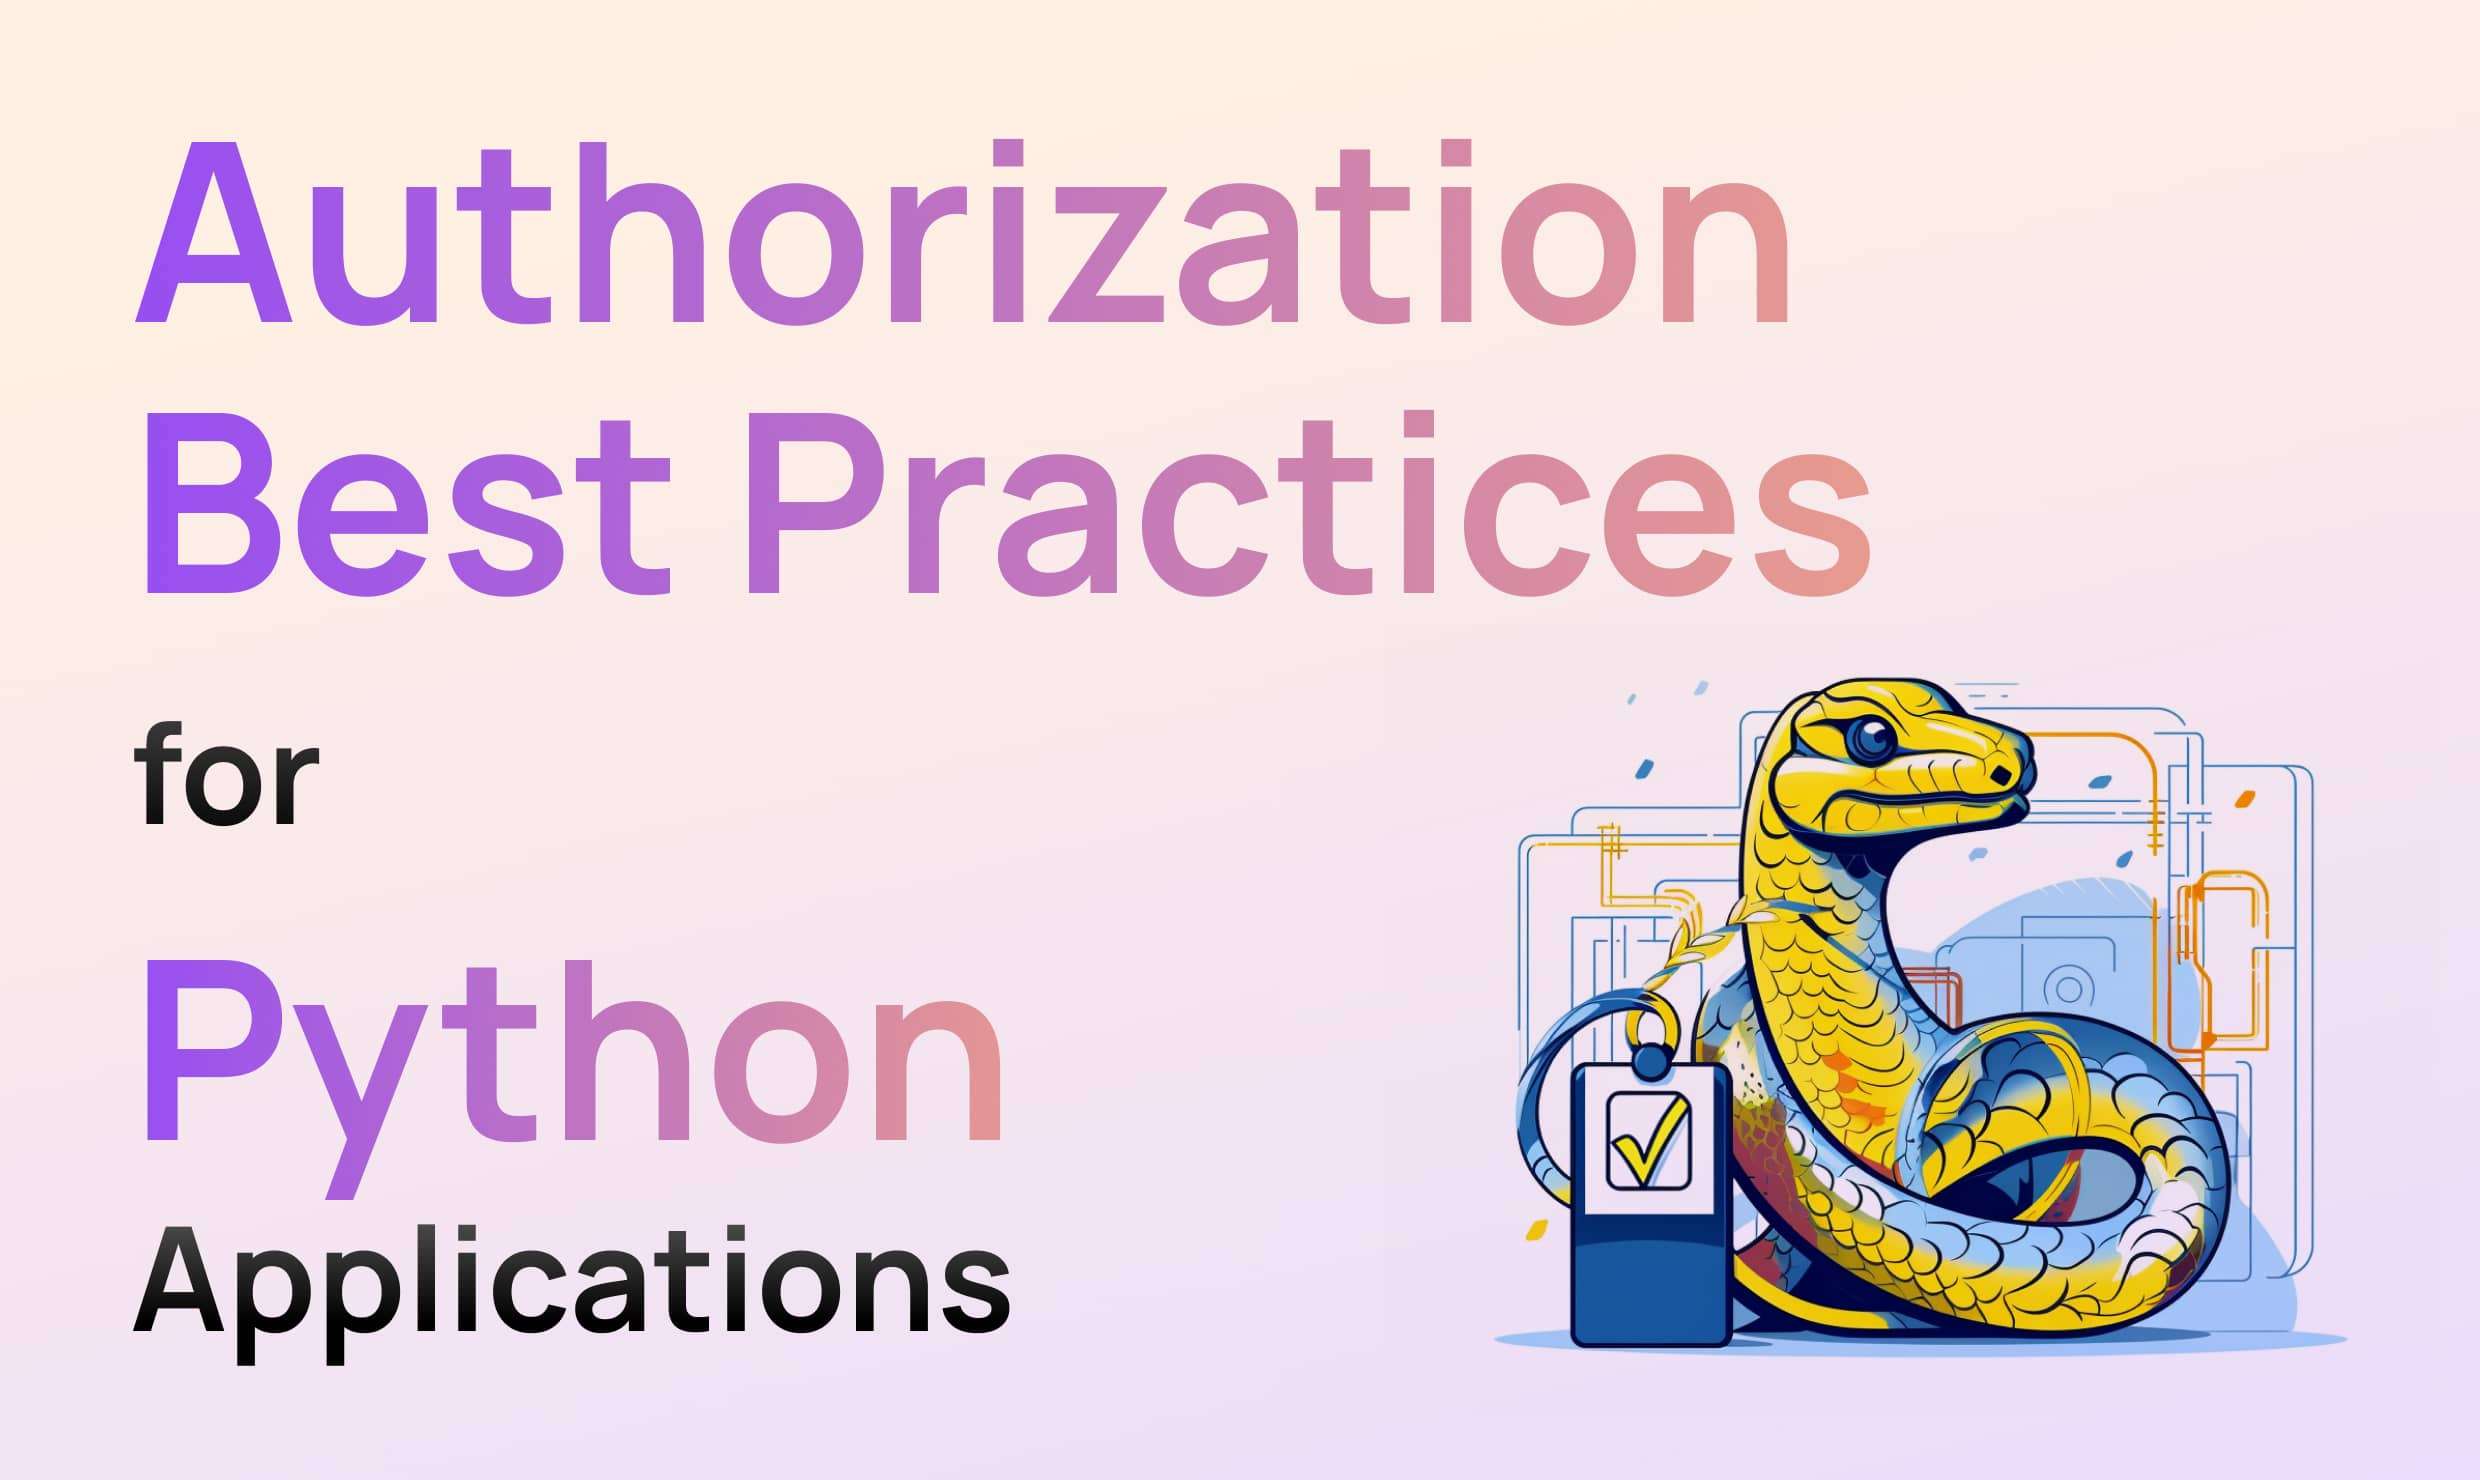 Best Practices for Authorization in Python